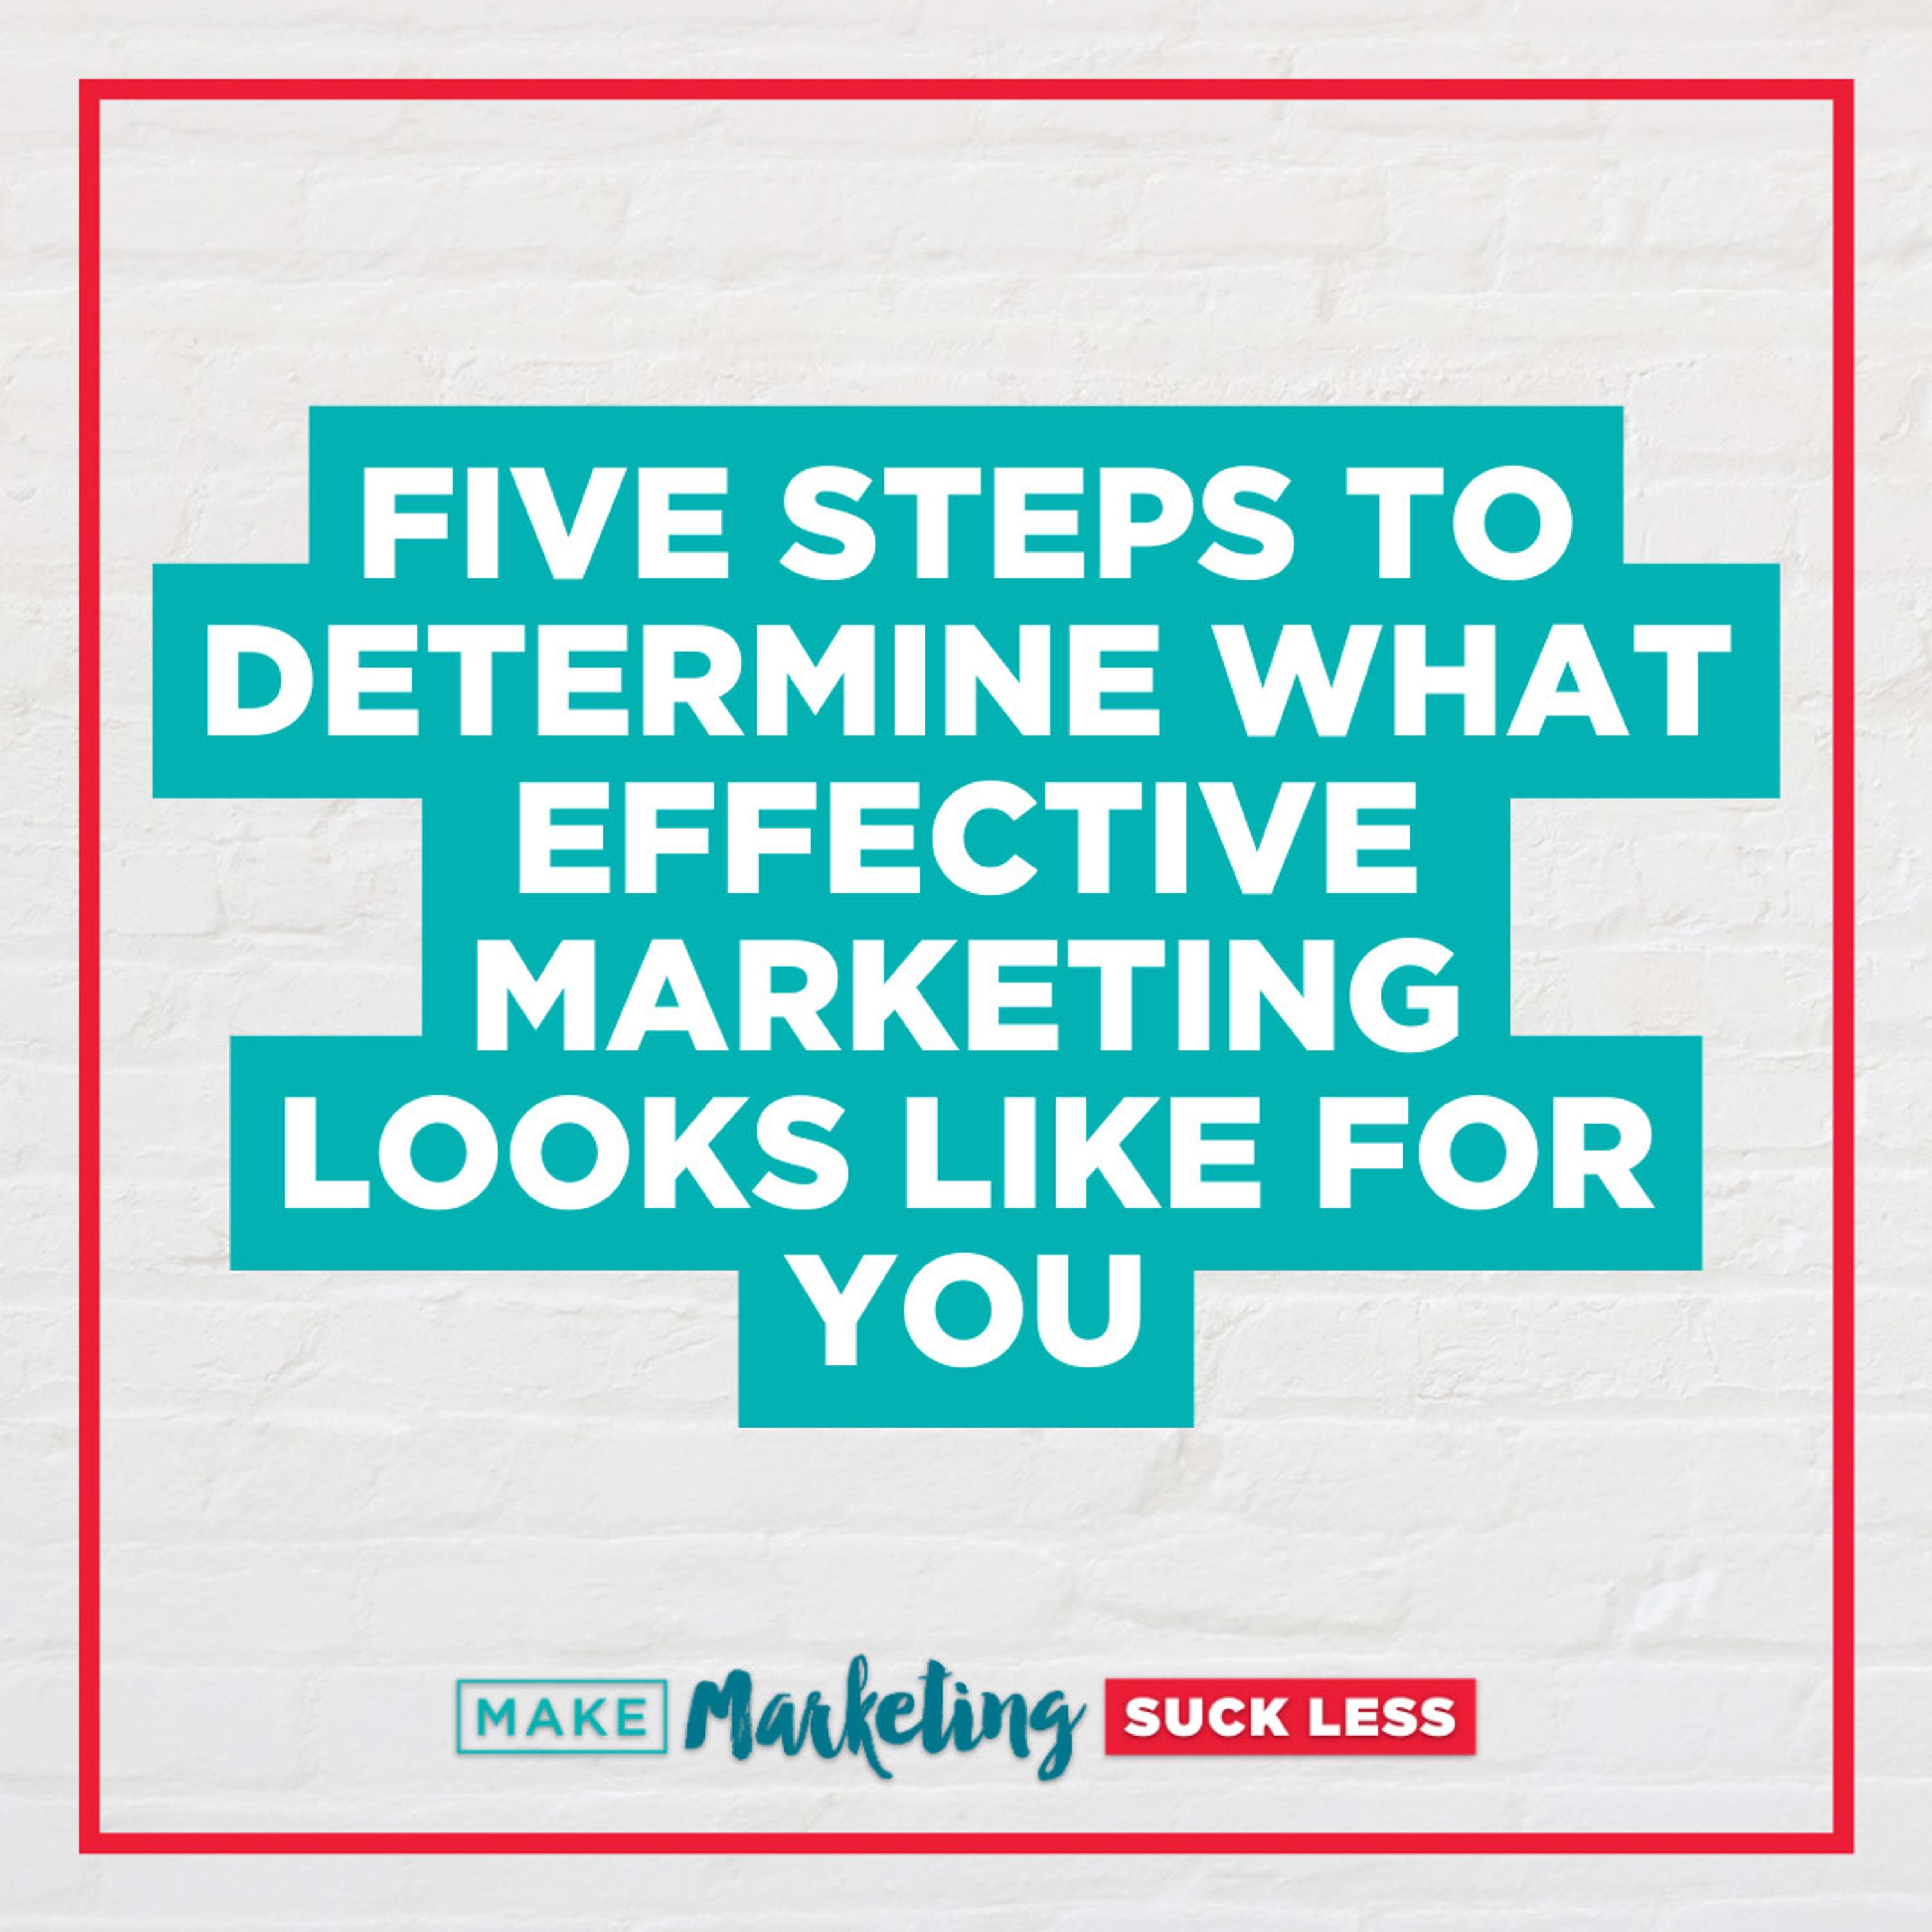 Five Steps To Determine What Effective Marketing Looks Like For You